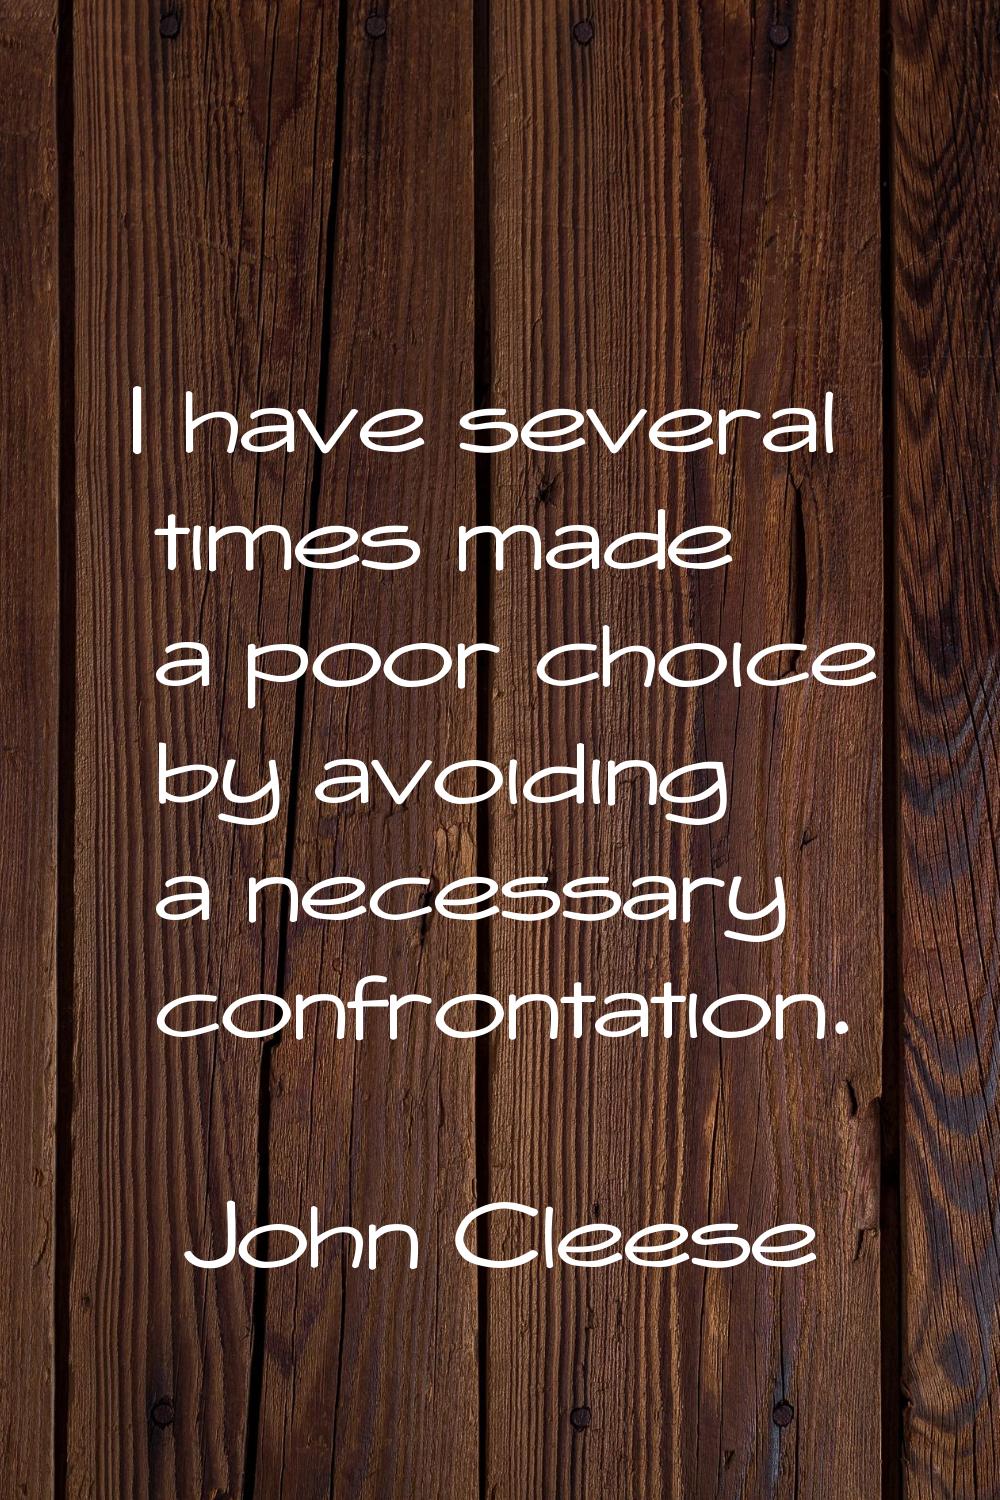 I have several times made a poor choice by avoiding a necessary confrontation.